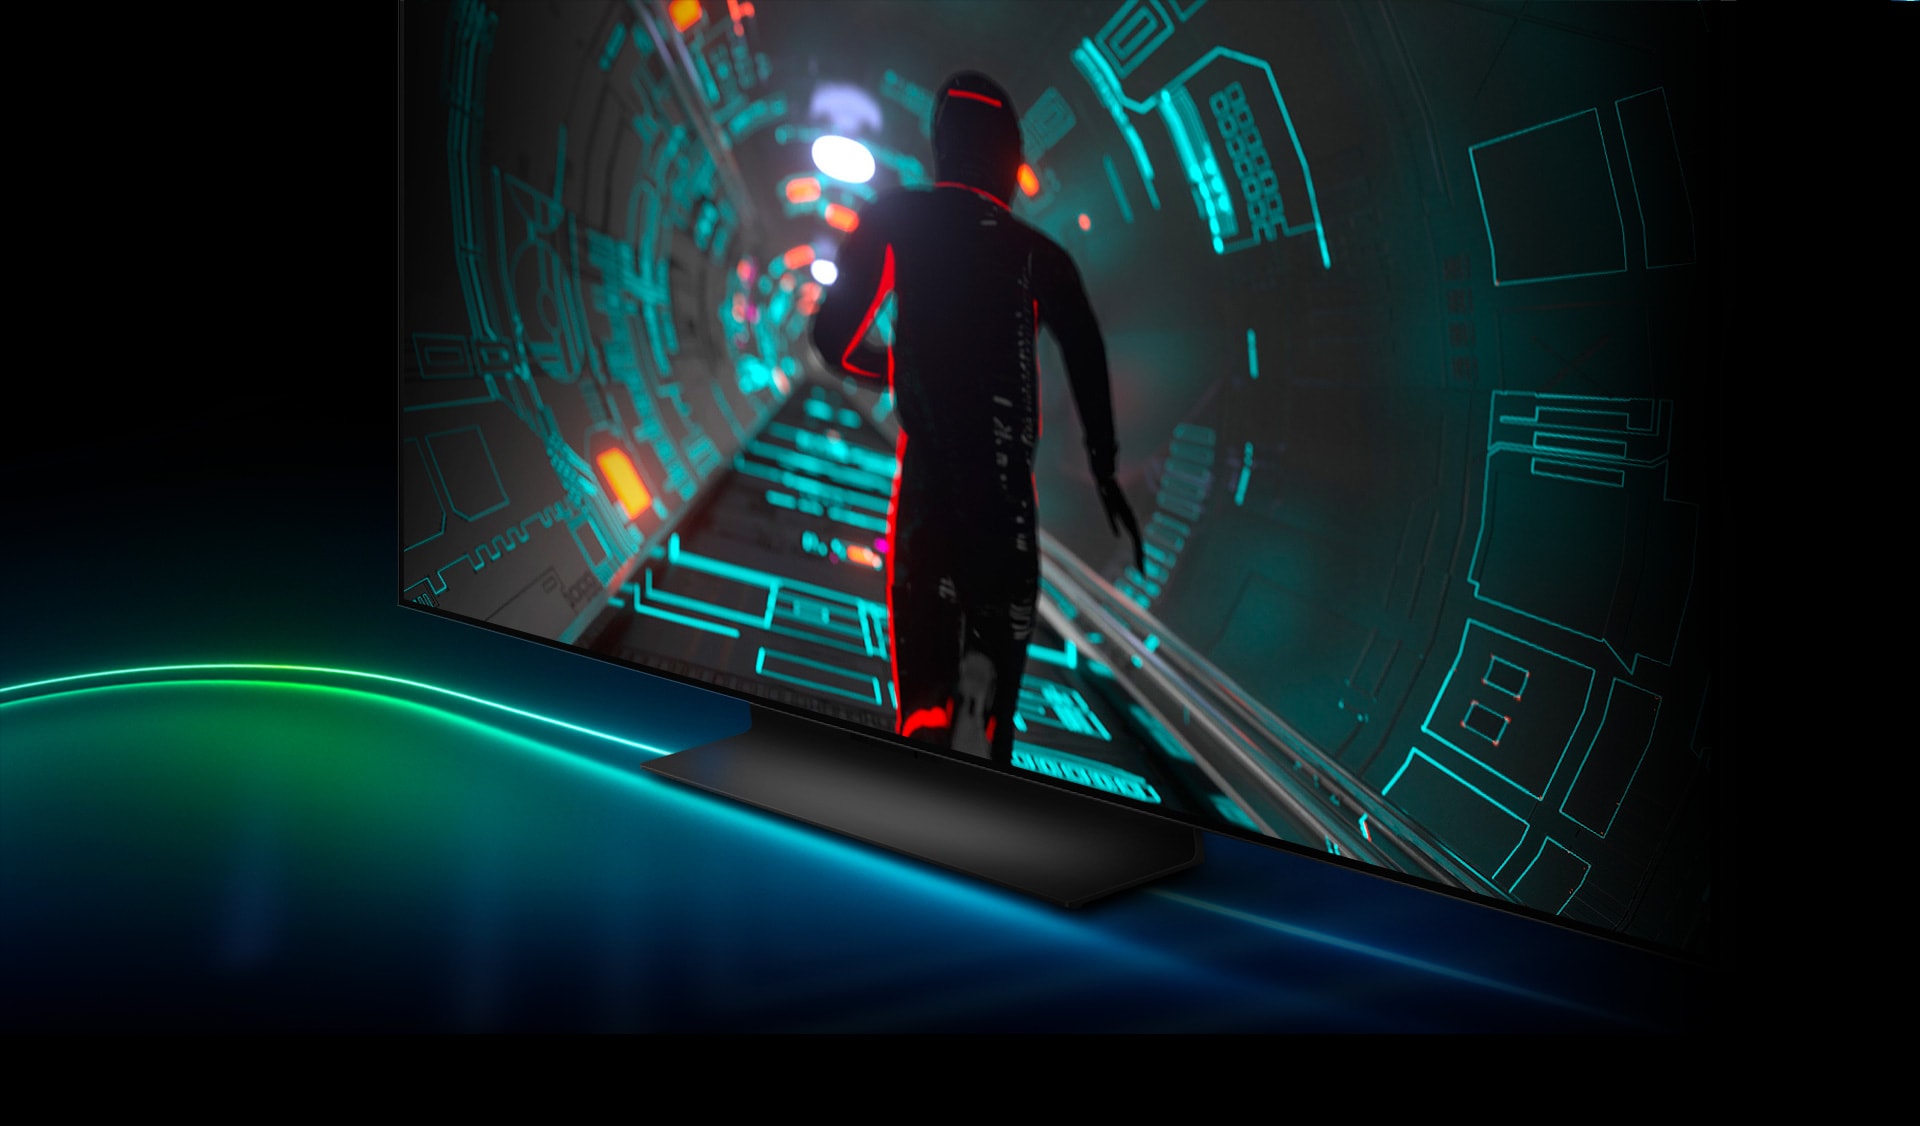 A sci-fi game character runs through a tunnel with neon lights